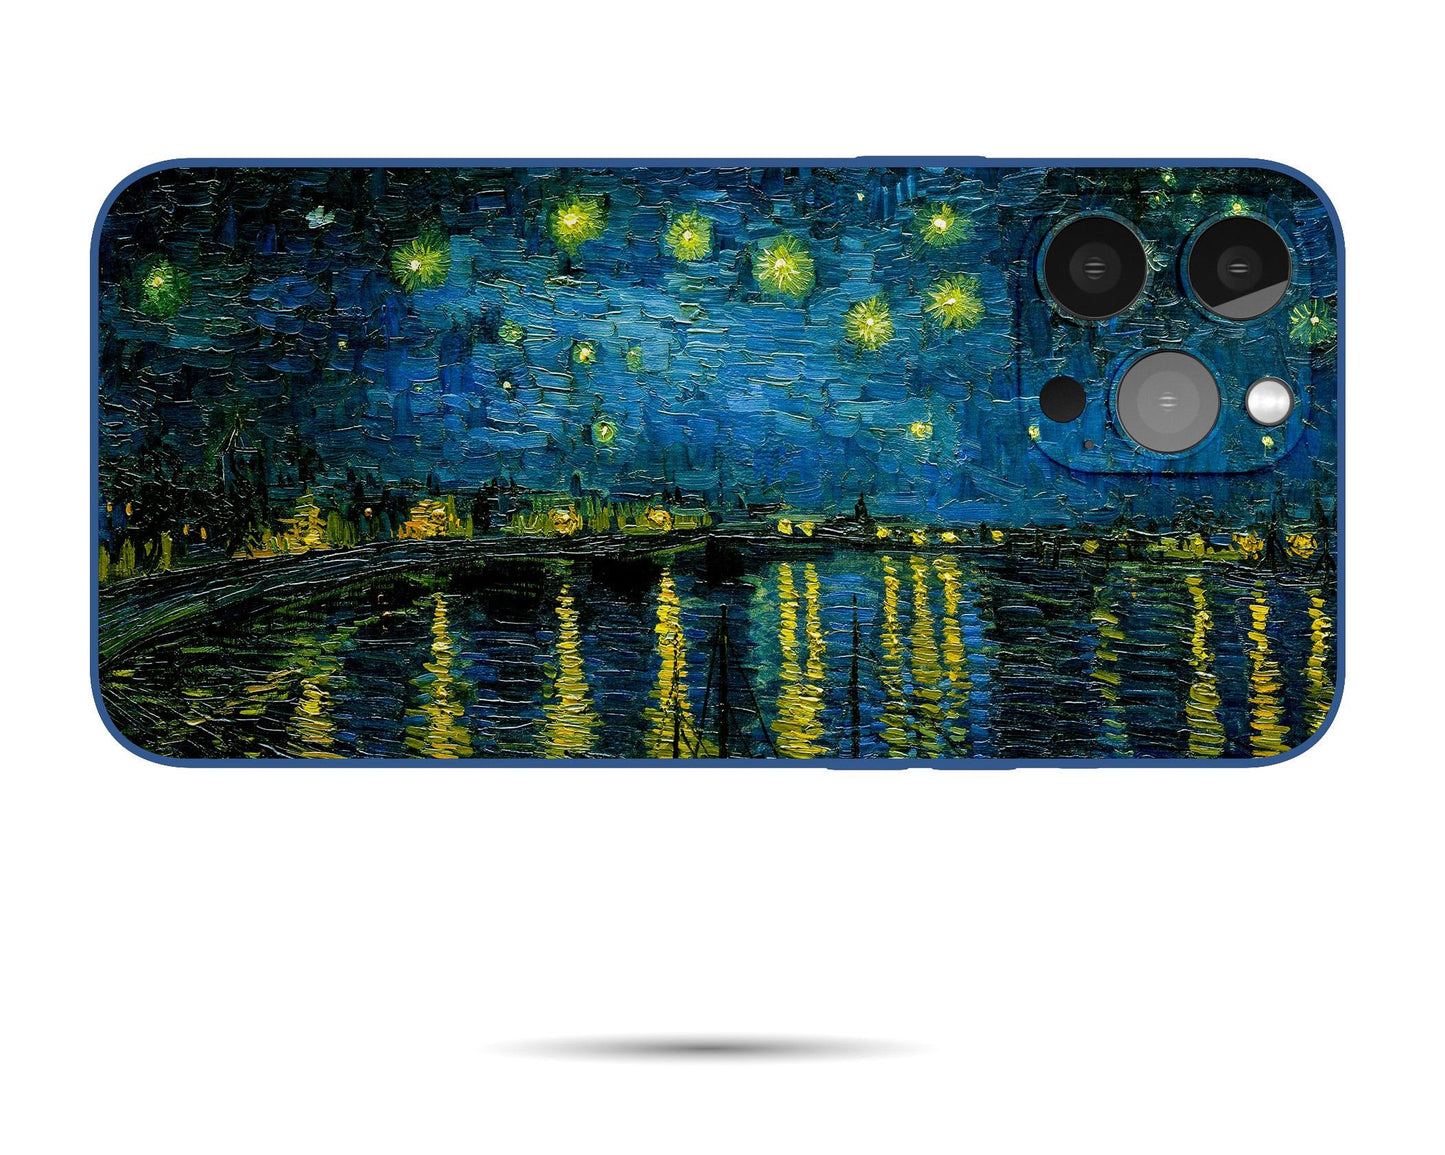 Vincent Van Gogh Starry Night Over The Rhone Phone Cover, Iphone 8Plus, Iphone Xs Case, Iphone 8 Plus Case Art, Vivid Colors, Silicone Case